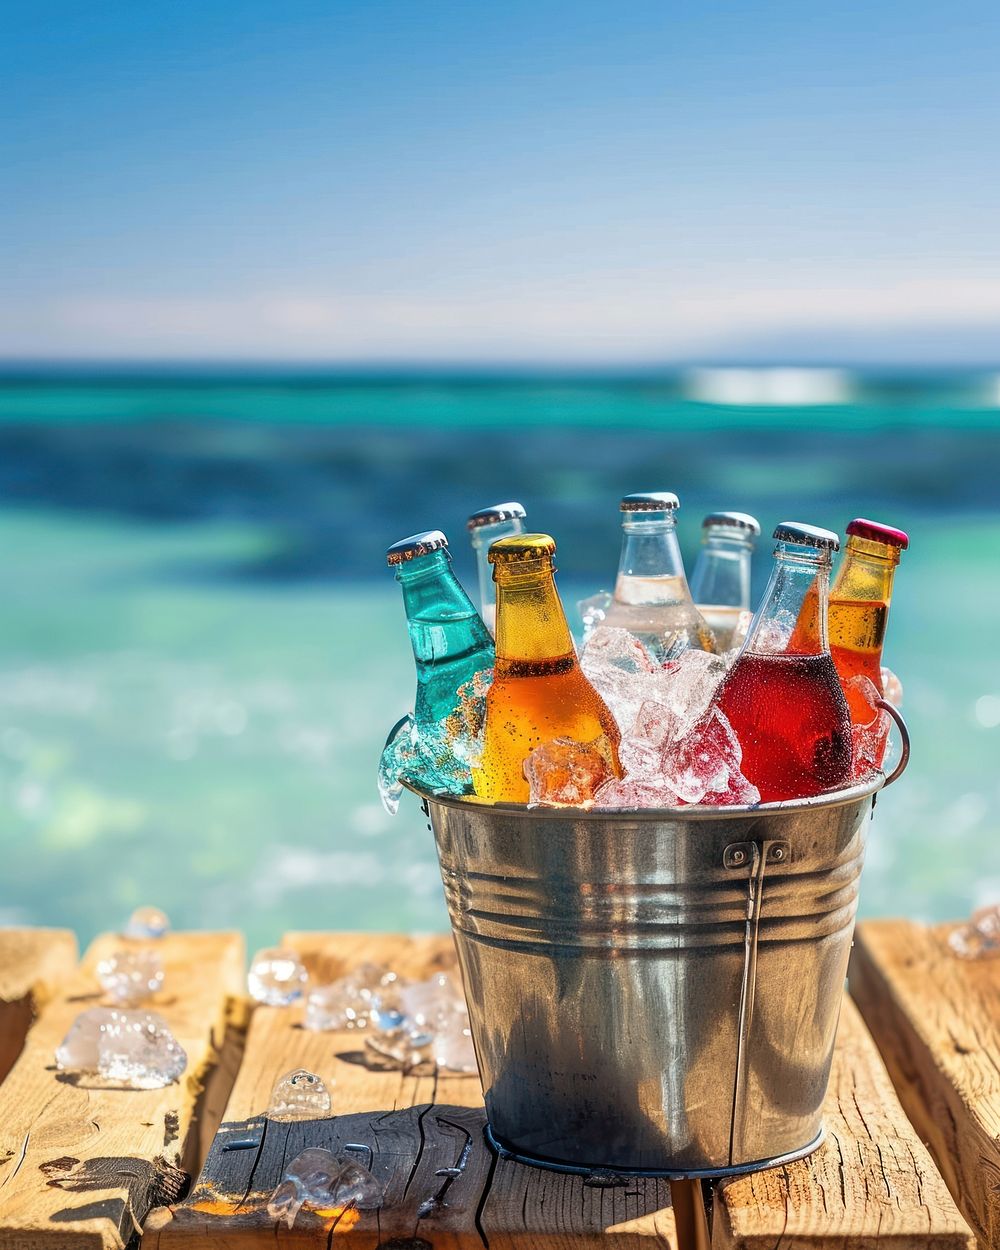 Assorted soda bottles in a metal bucket full of ice put on wood table against beach view outdoors vacation summer.